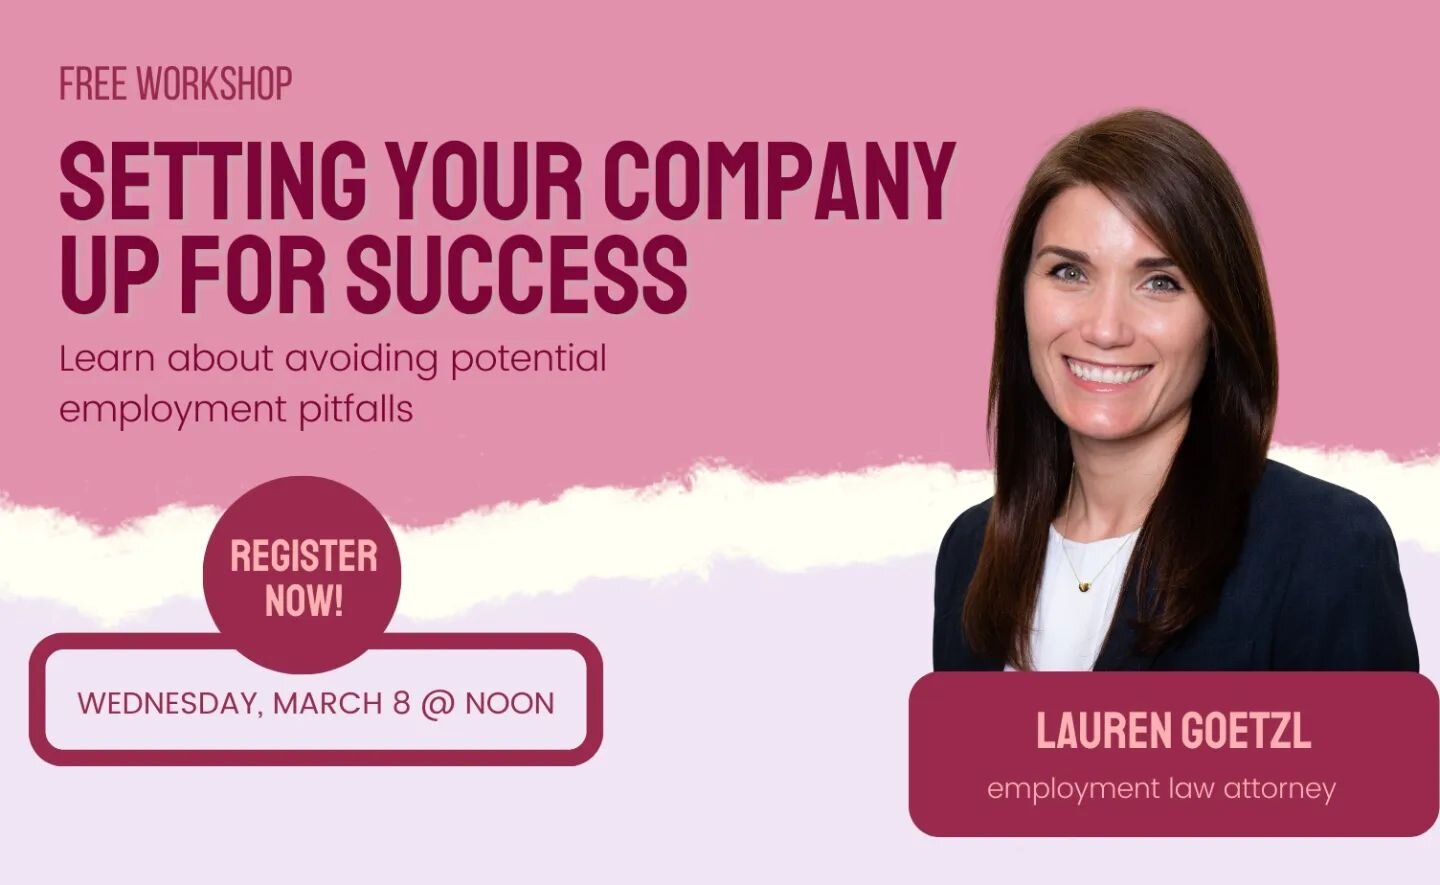 A few spots left!! Join us TOMORROW for a workshop for new entrepreneurs and small businesses (and anyone thinking about starting a business). Learn from management-side employment law attorney Lauren Goetzl how to get started while avoiding potentia